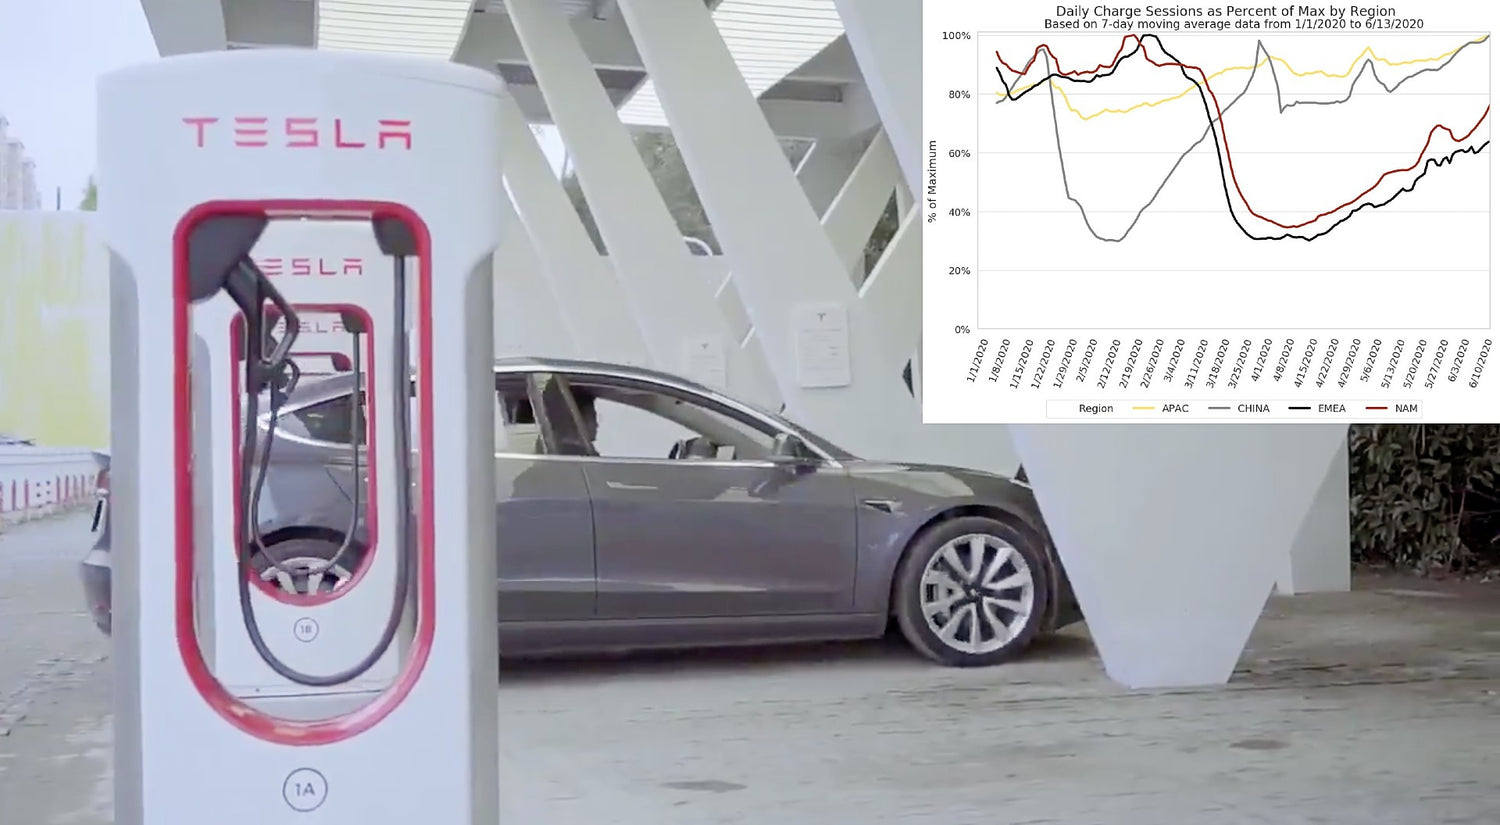 Tesla Supercharger Use Beats Pre-Pandemic Highs In China & Asia Pacific